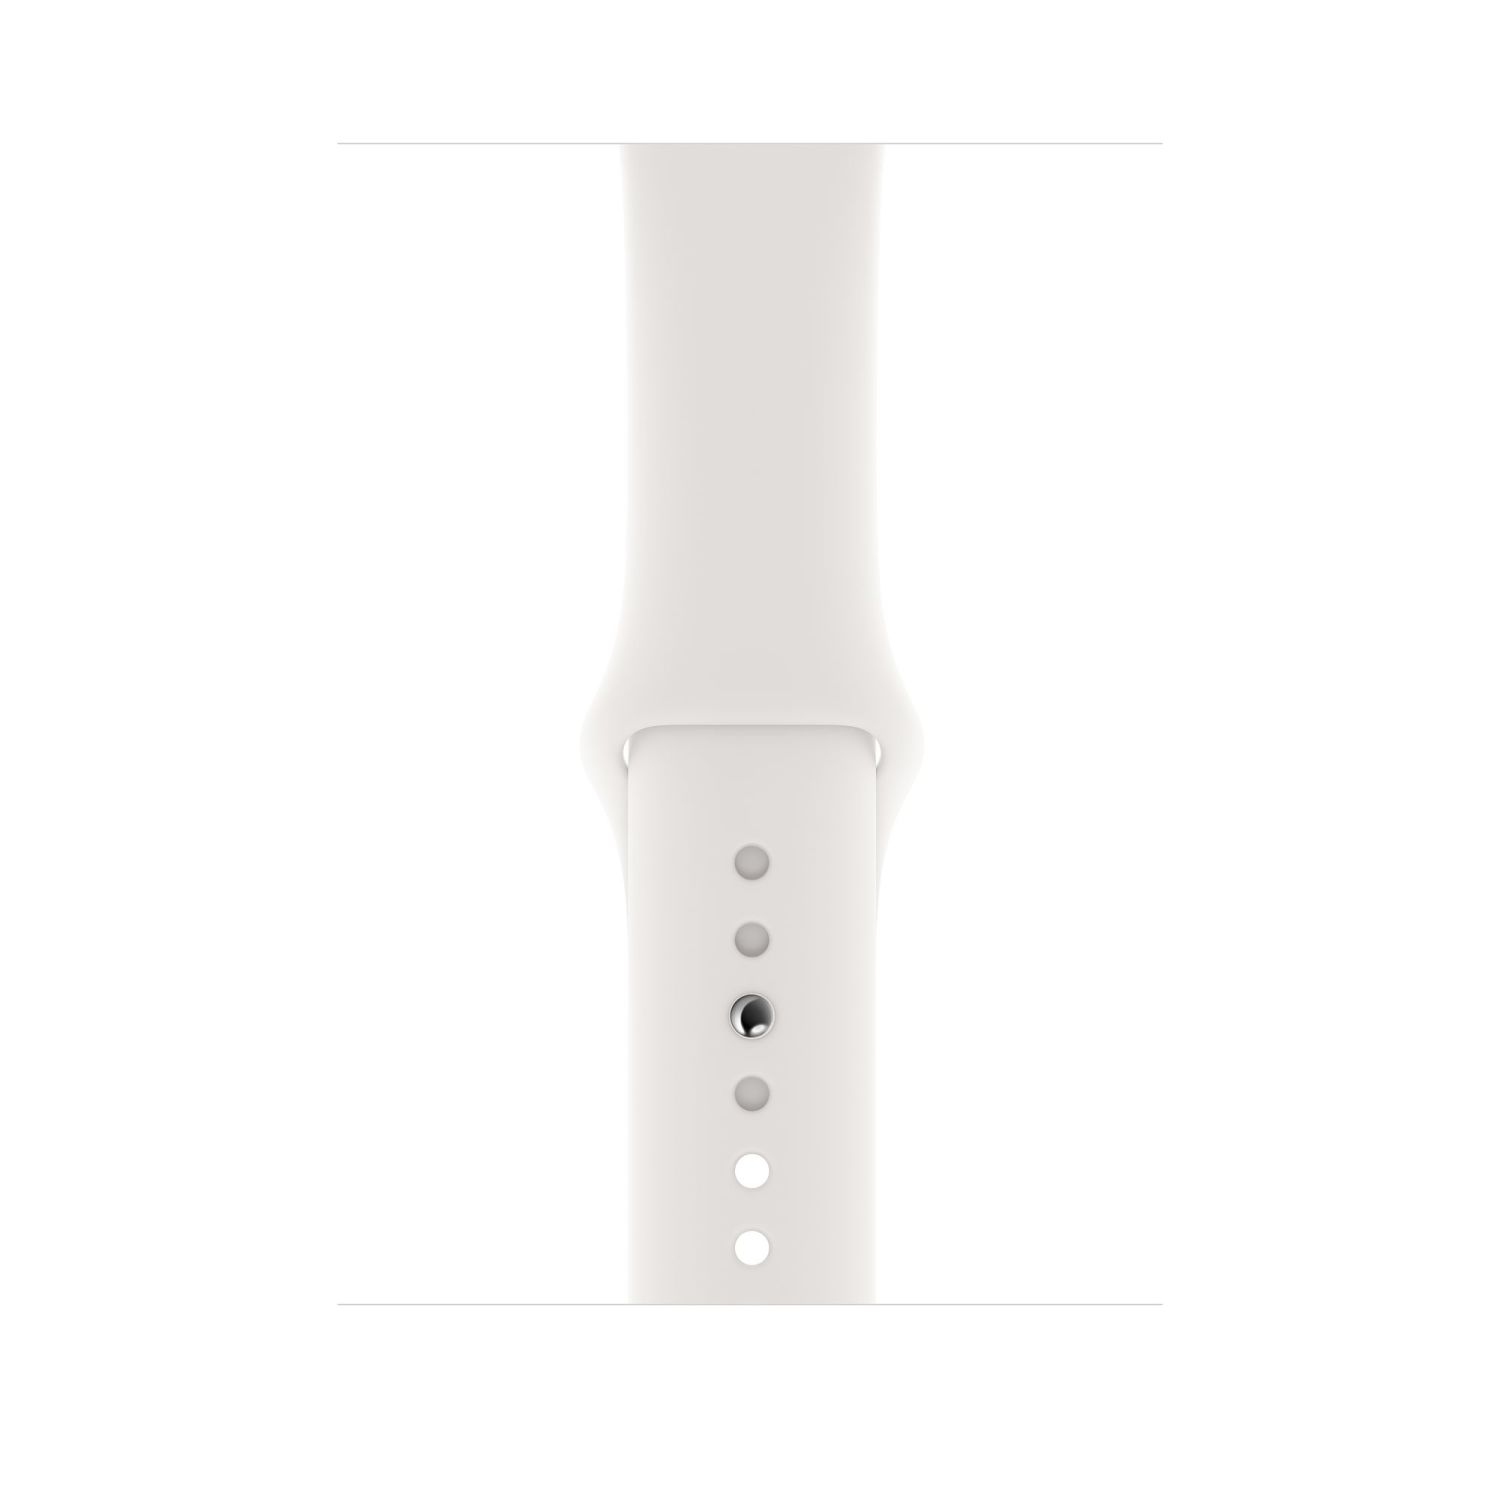 Apple Watch Series 4 (GPS + Cellular) 44mm Silver Aluminum Case with White Sport Band (MTUU2) б/у